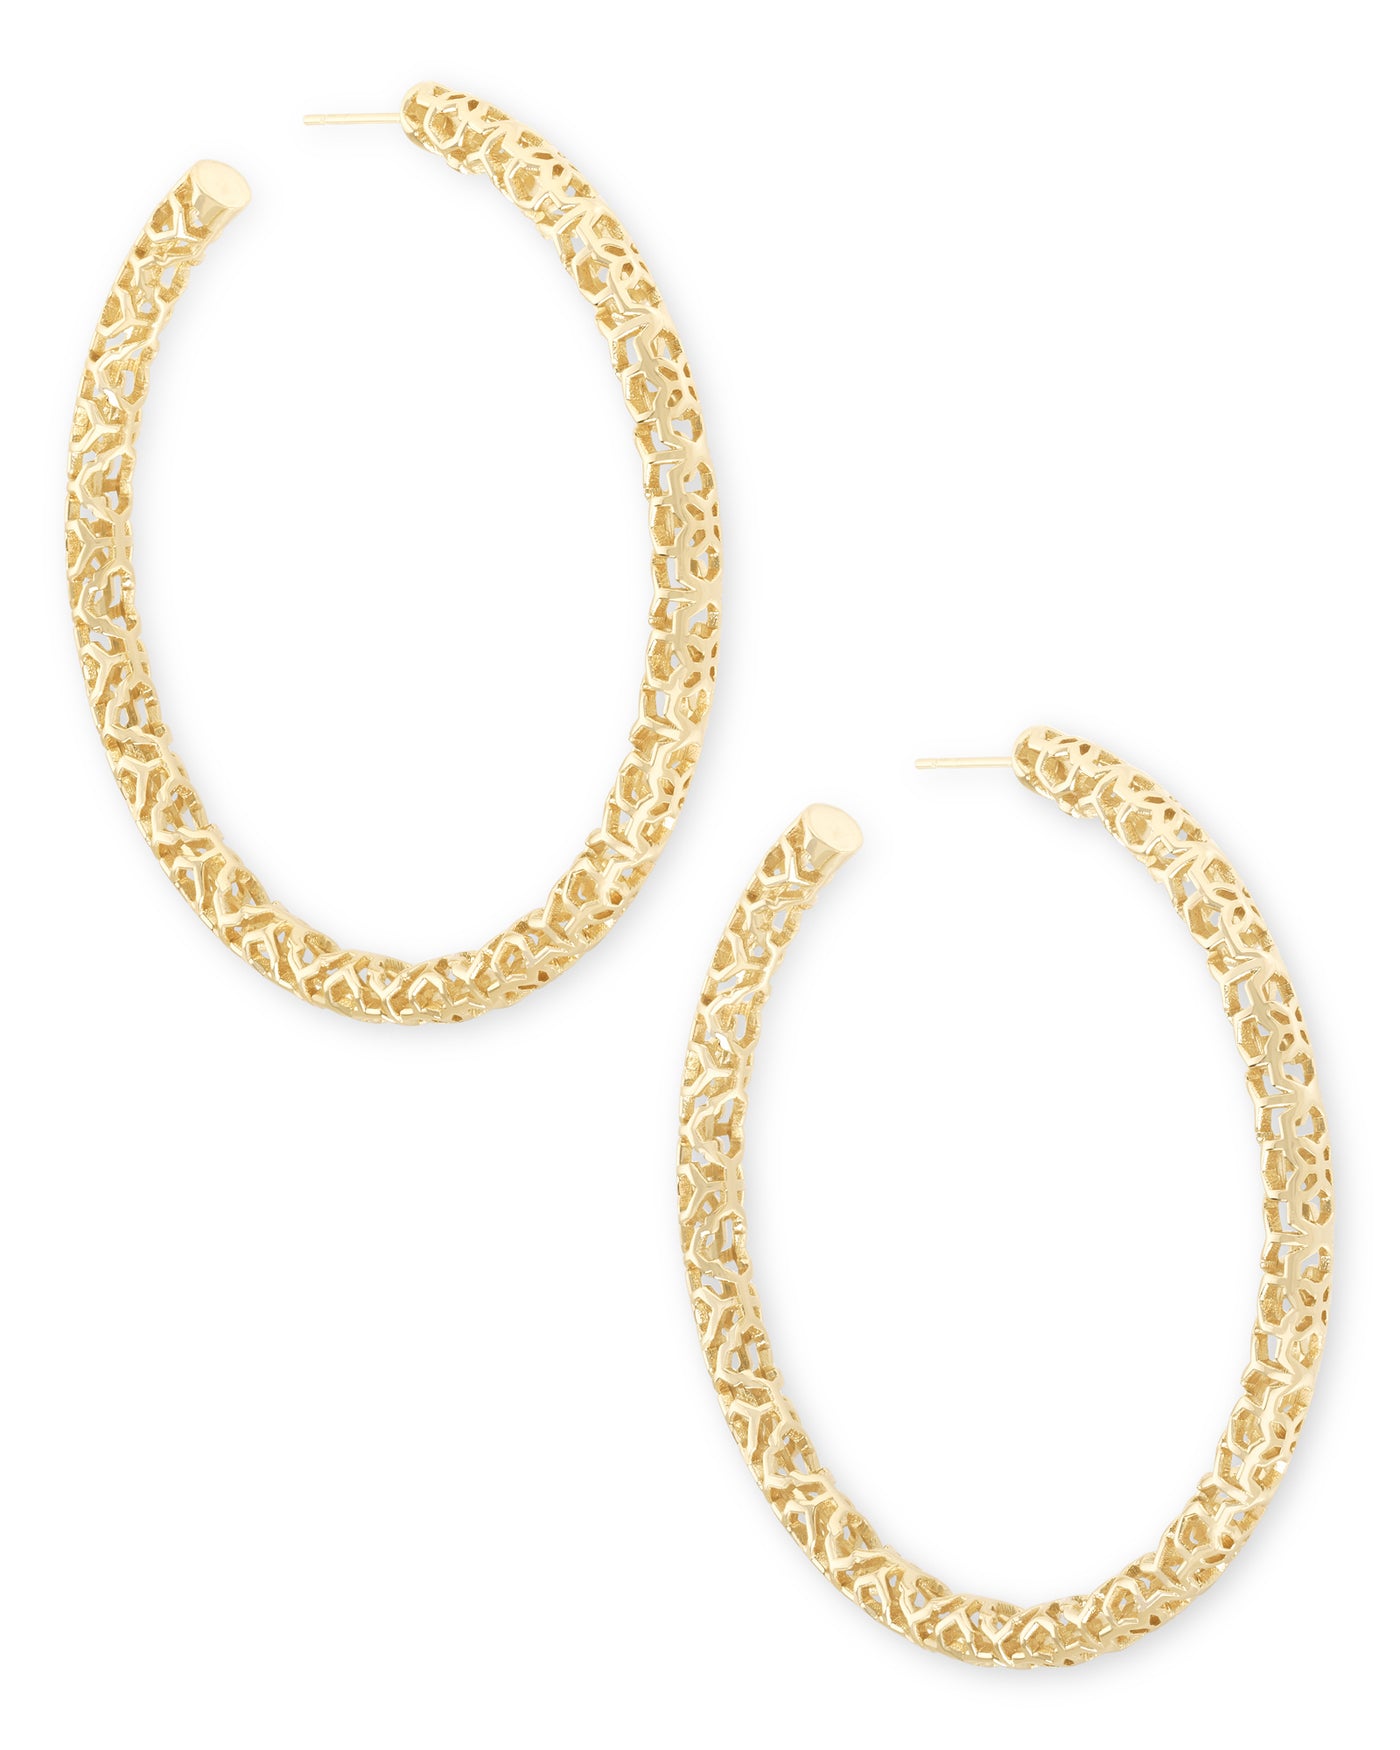 Kendra Scott Maggie 2.5' Hoop Earrings-Earrings-Kendra Scott-Market Street Nest, Fashionable Clothing, Shoes and Home Décor Located in Mabank, TX